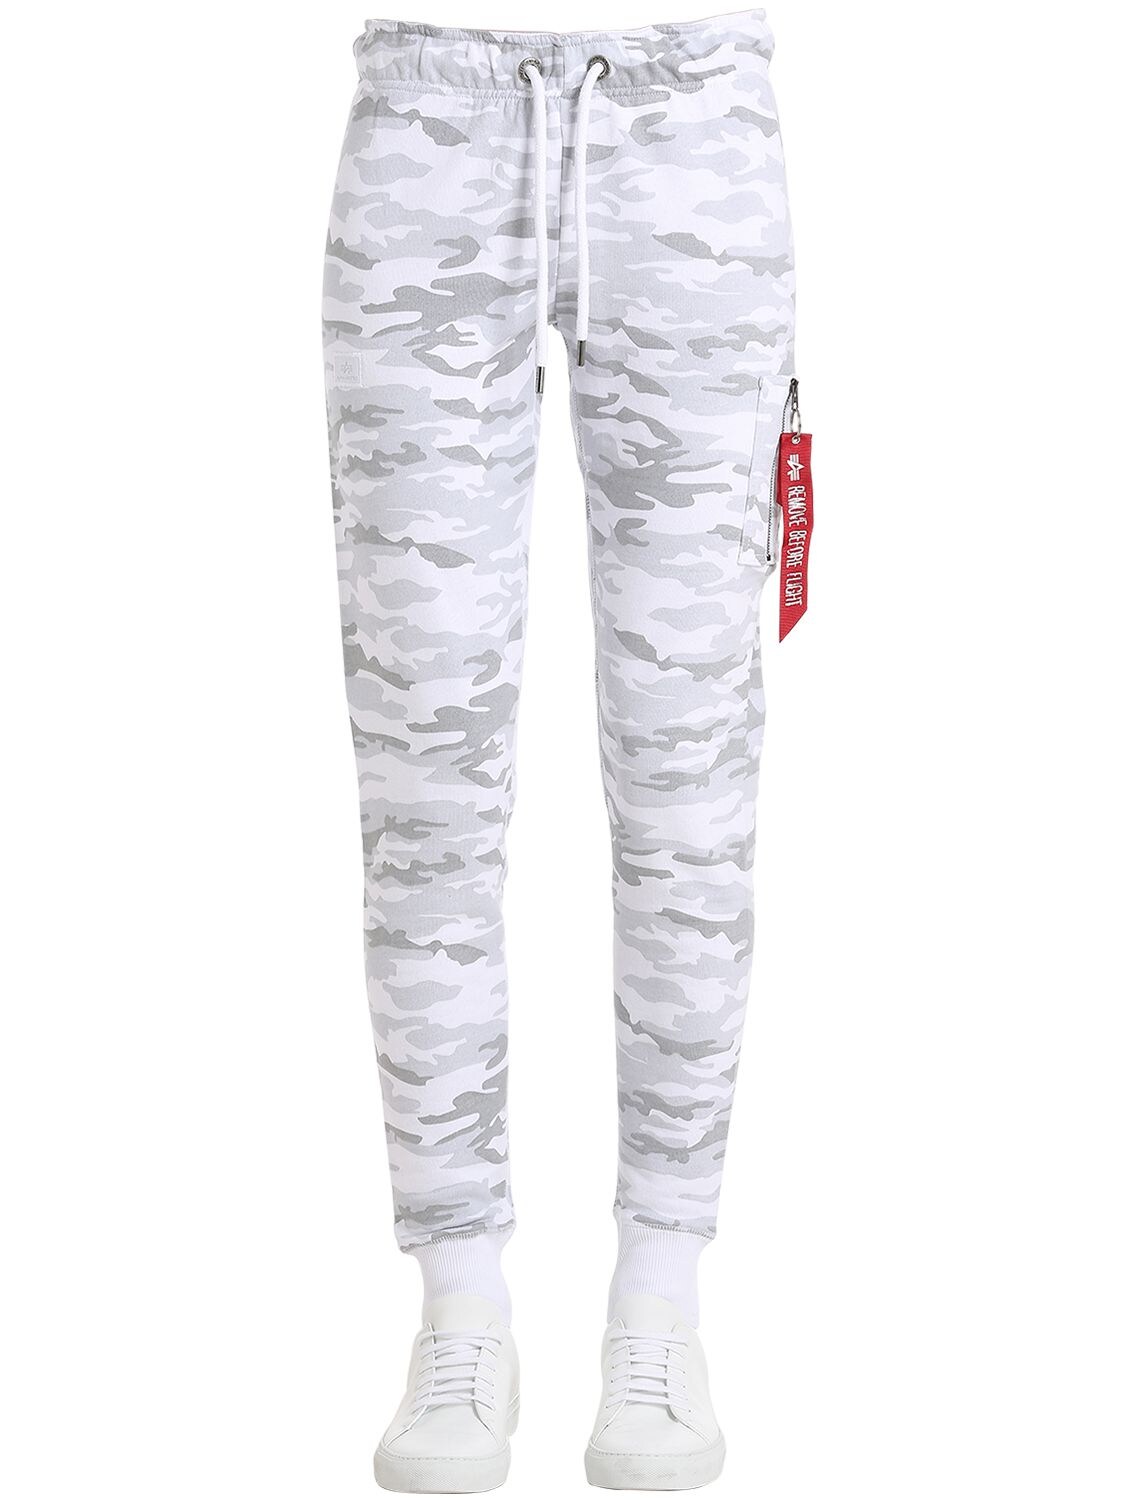 Alpha Industries Camouflage Sweatpants W/ Pocket In White/grey